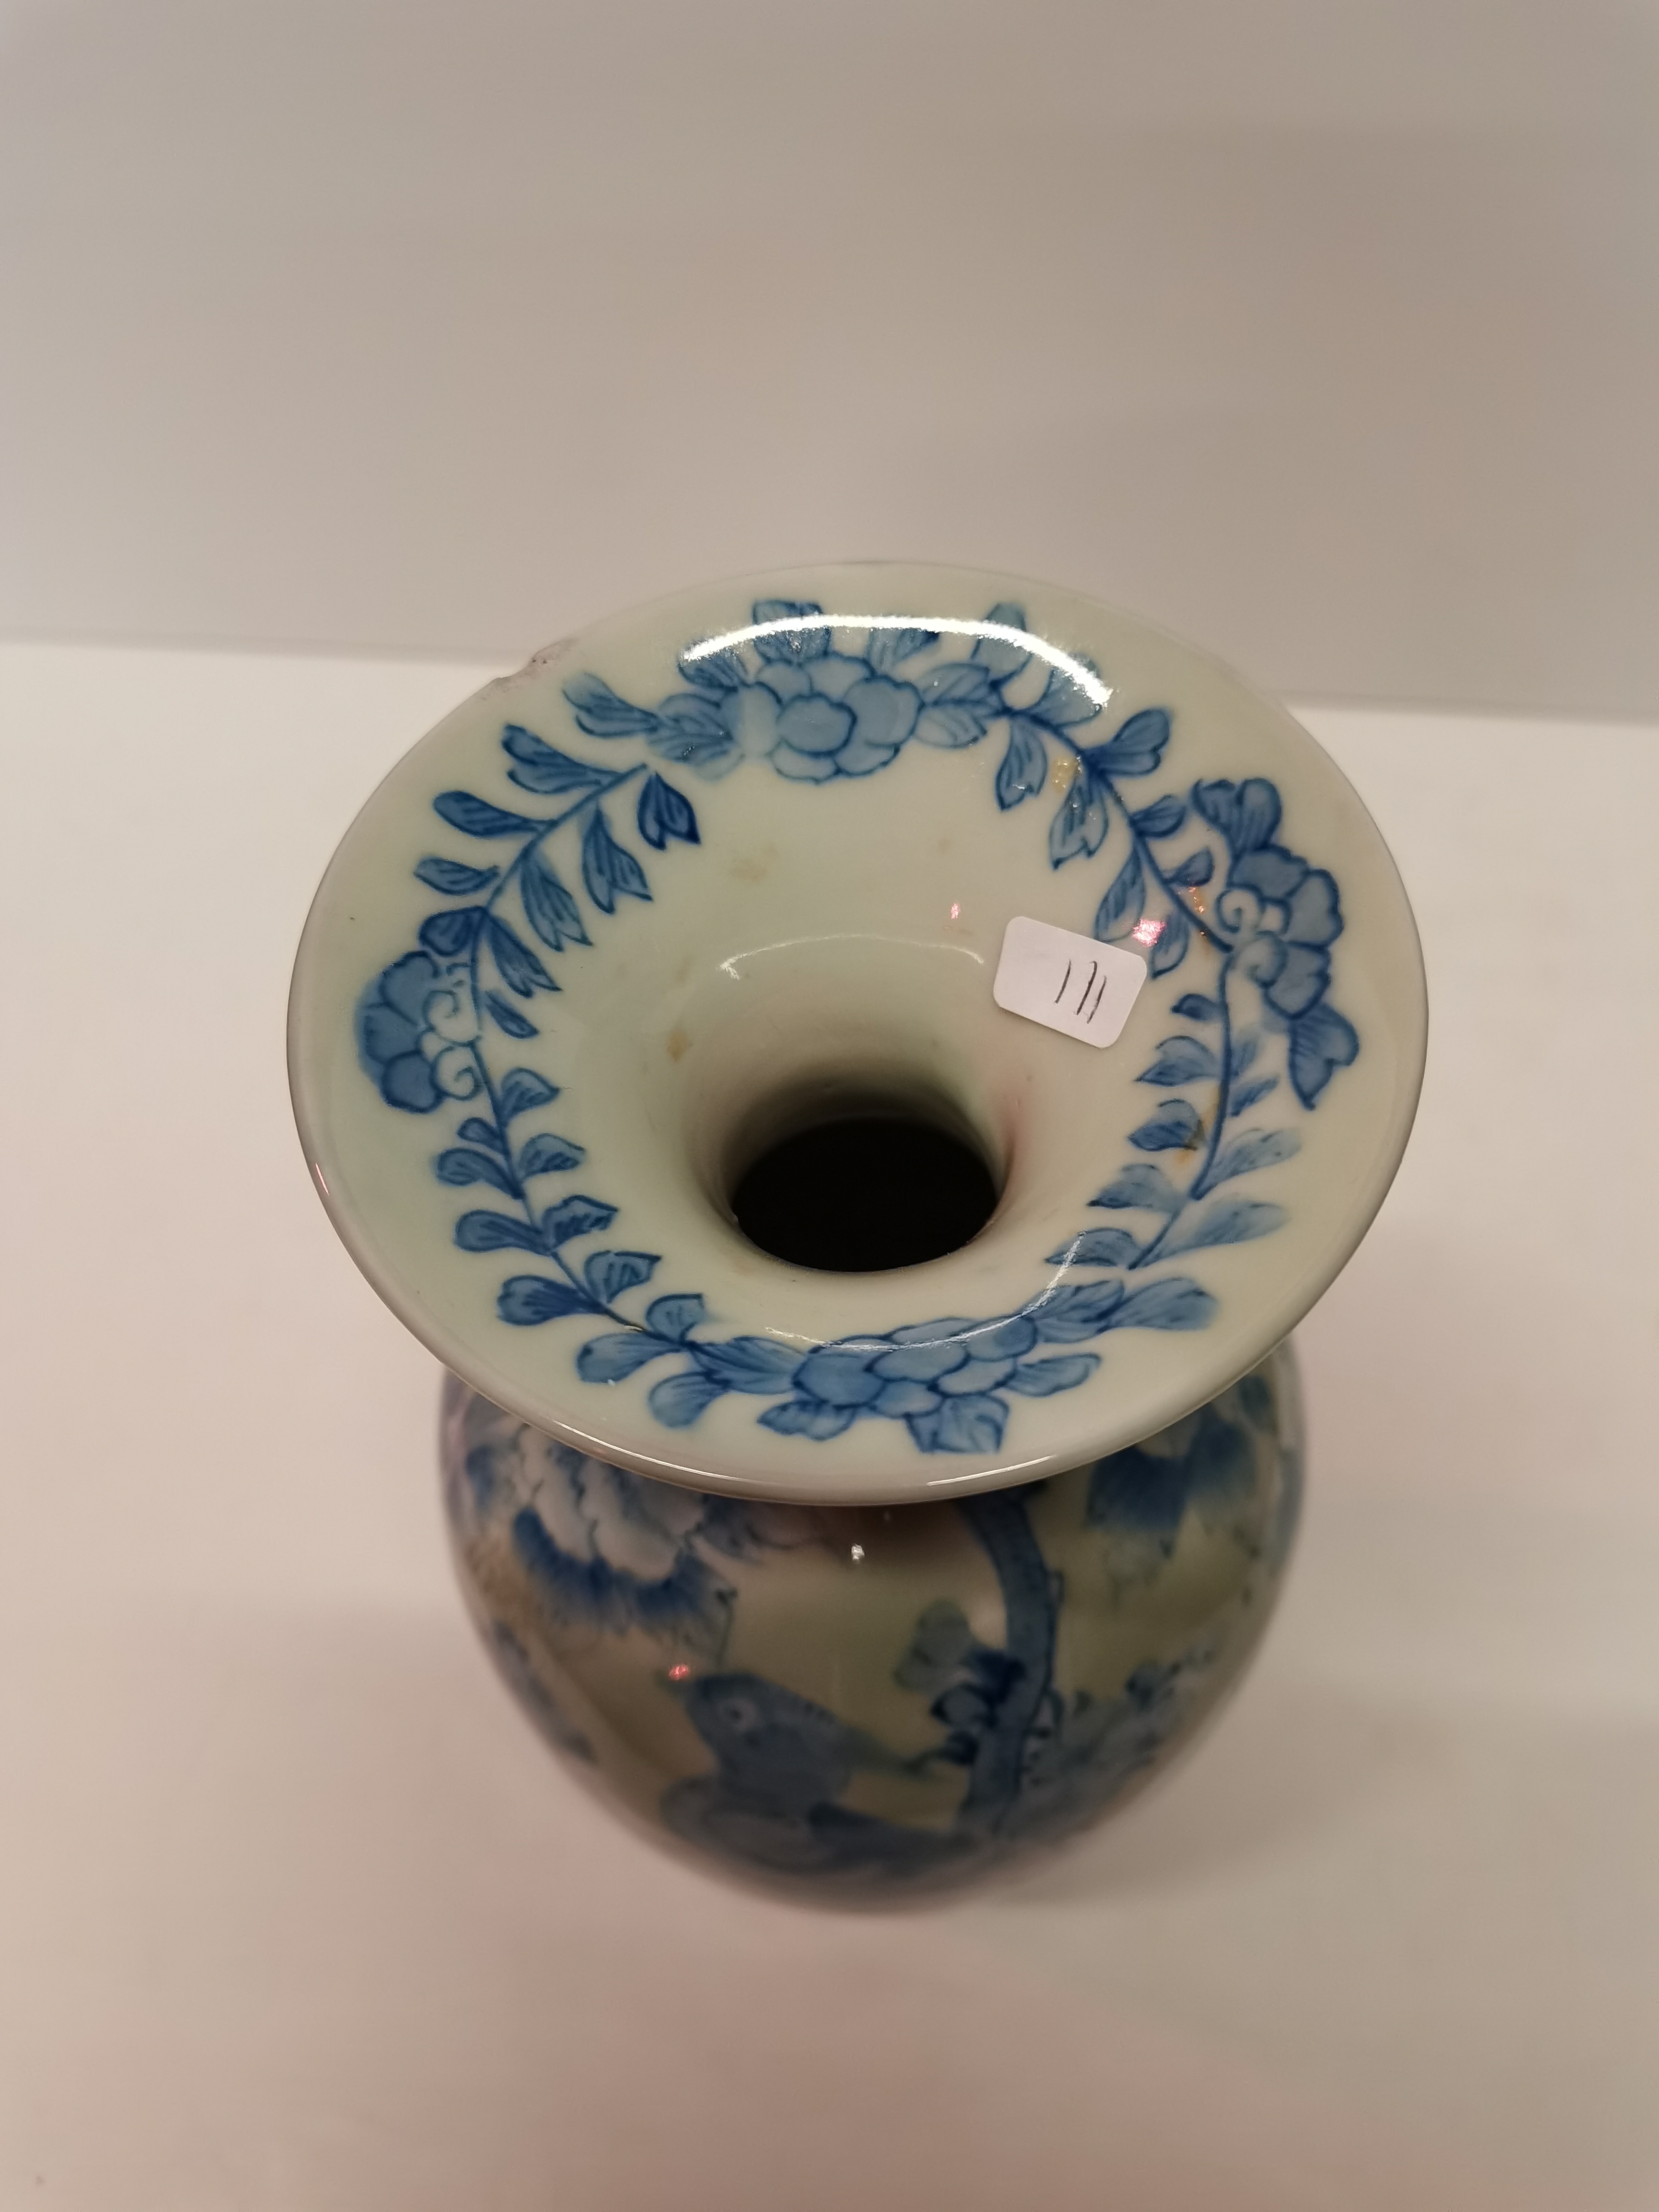 25cm height blue and white chinese vase 25cm height no character marks - Image 3 of 3